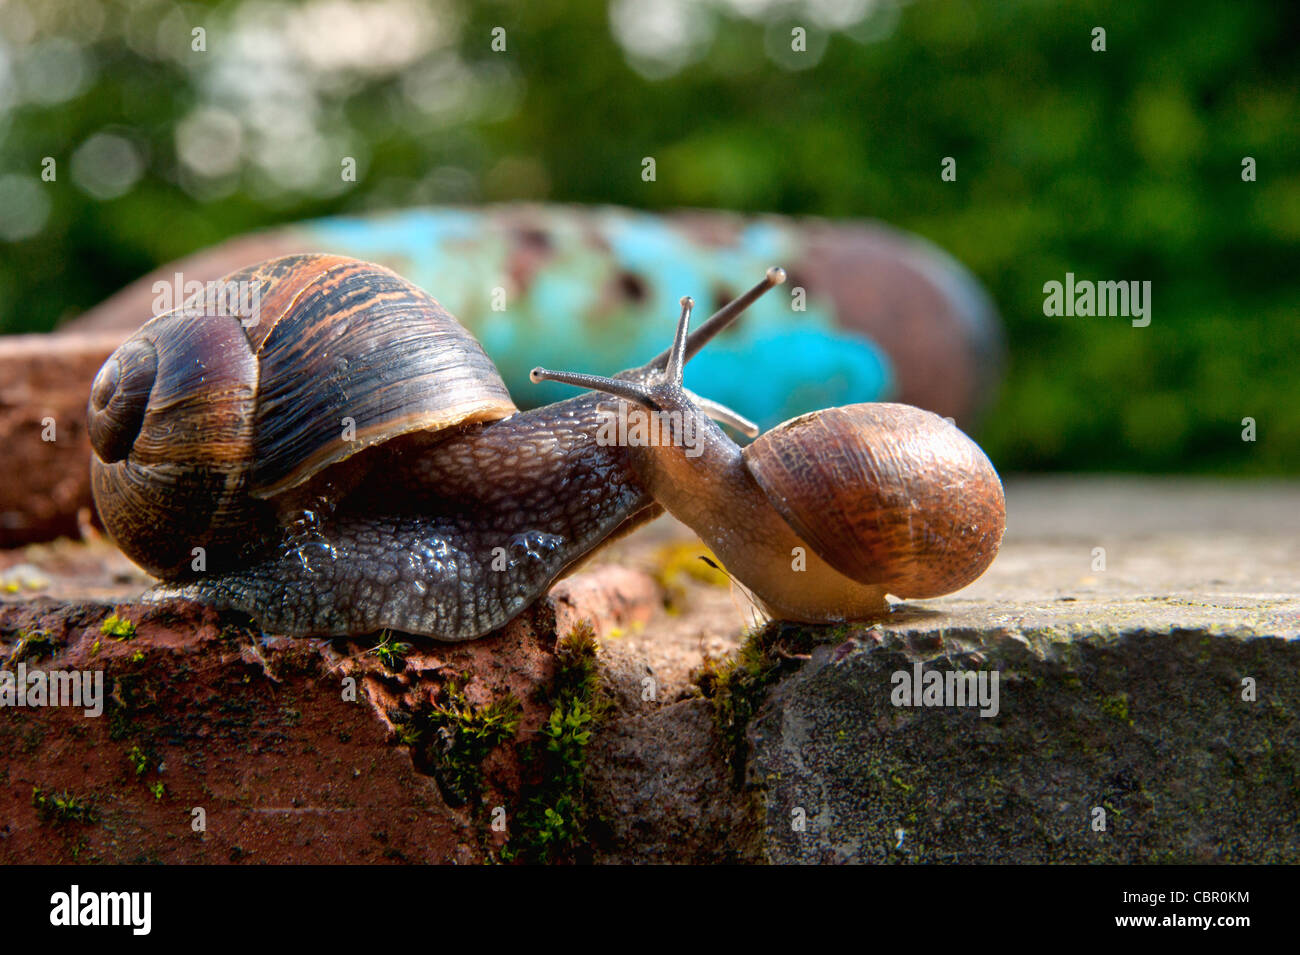 Two snails meeting on a garden wall Stock Photo